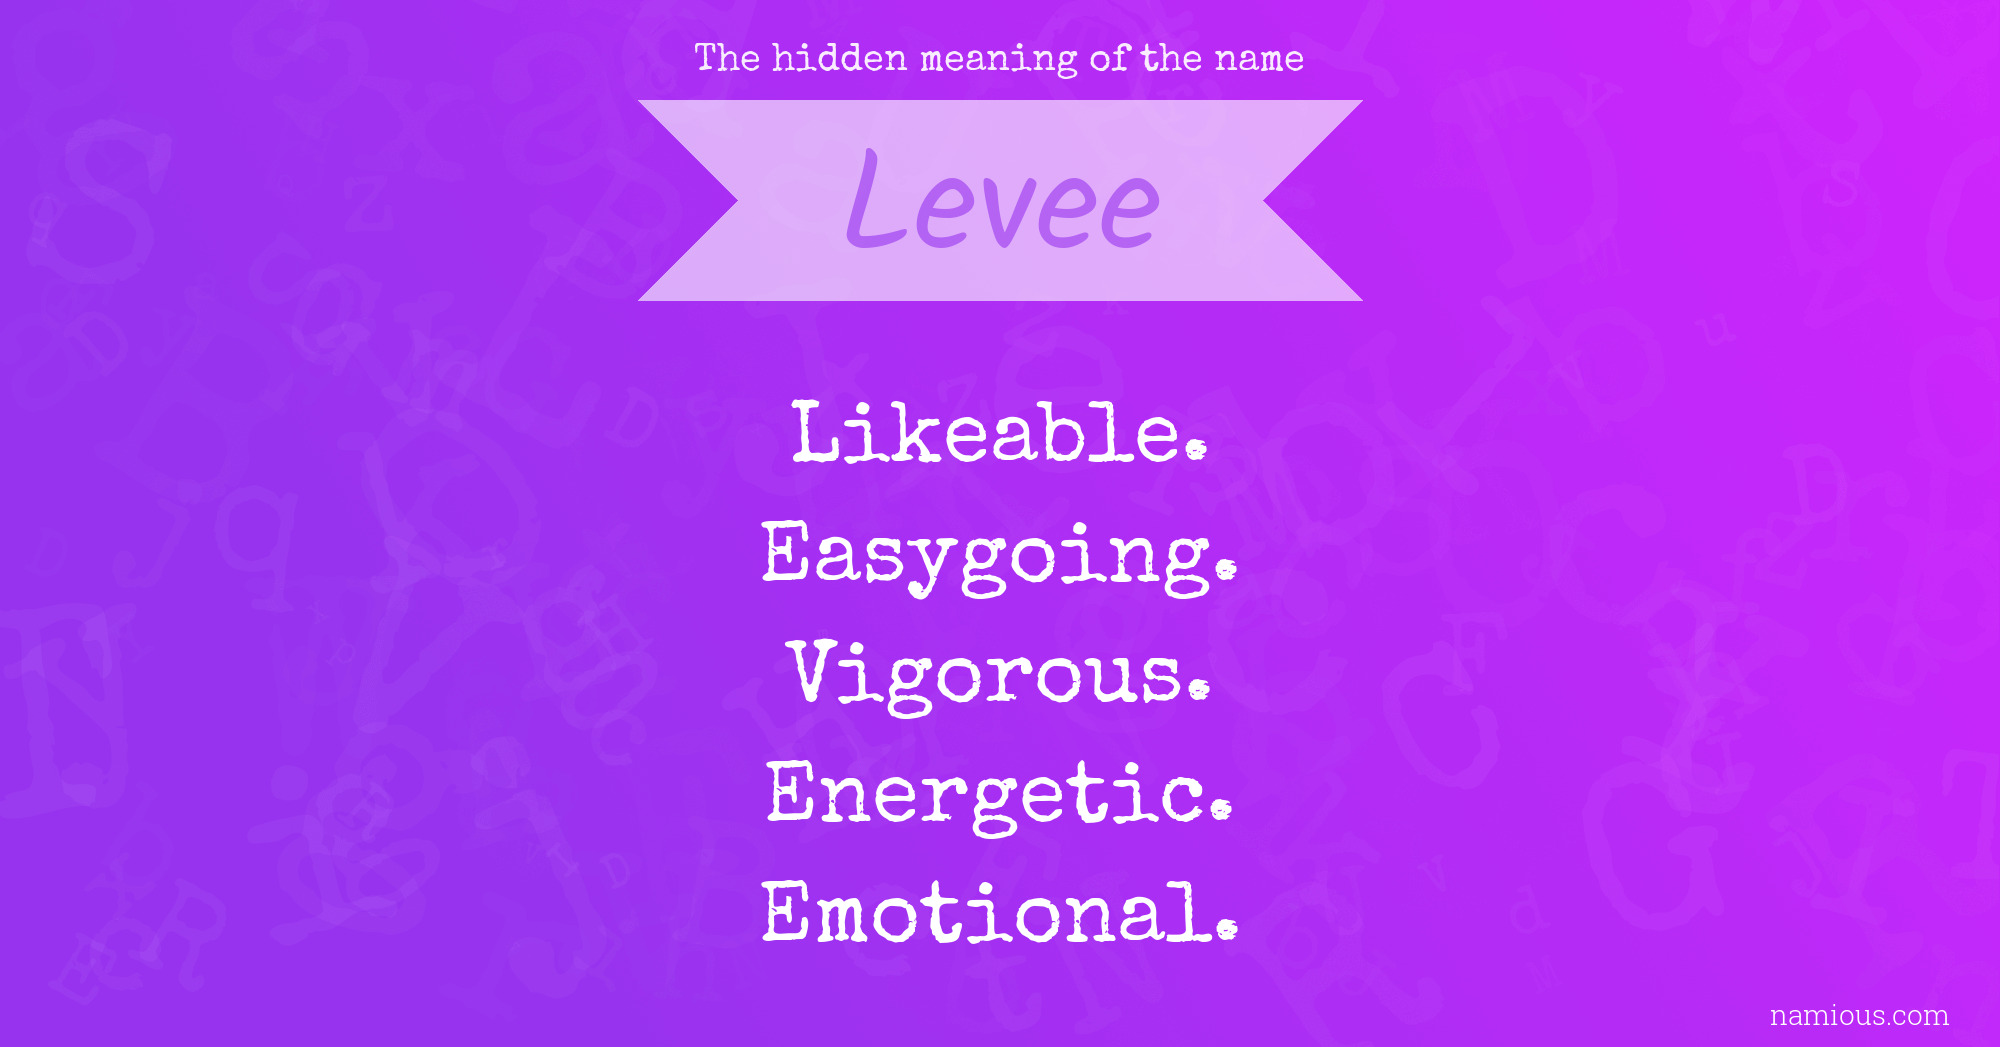 The hidden meaning of the name Levee